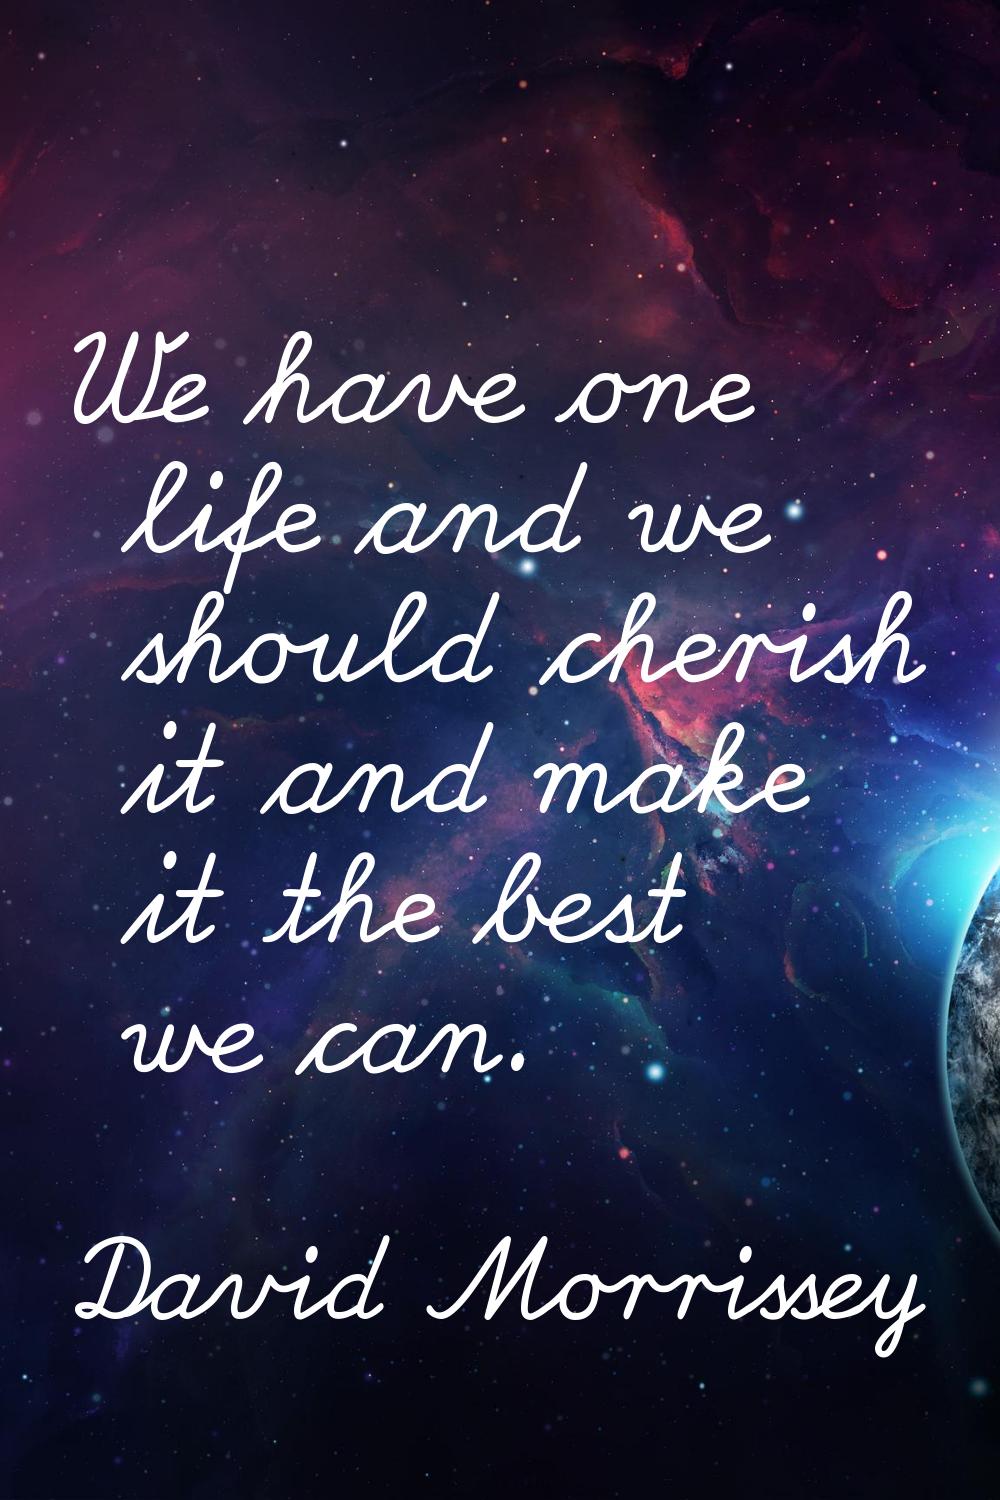 We have one life and we should cherish it and make it the best we can.